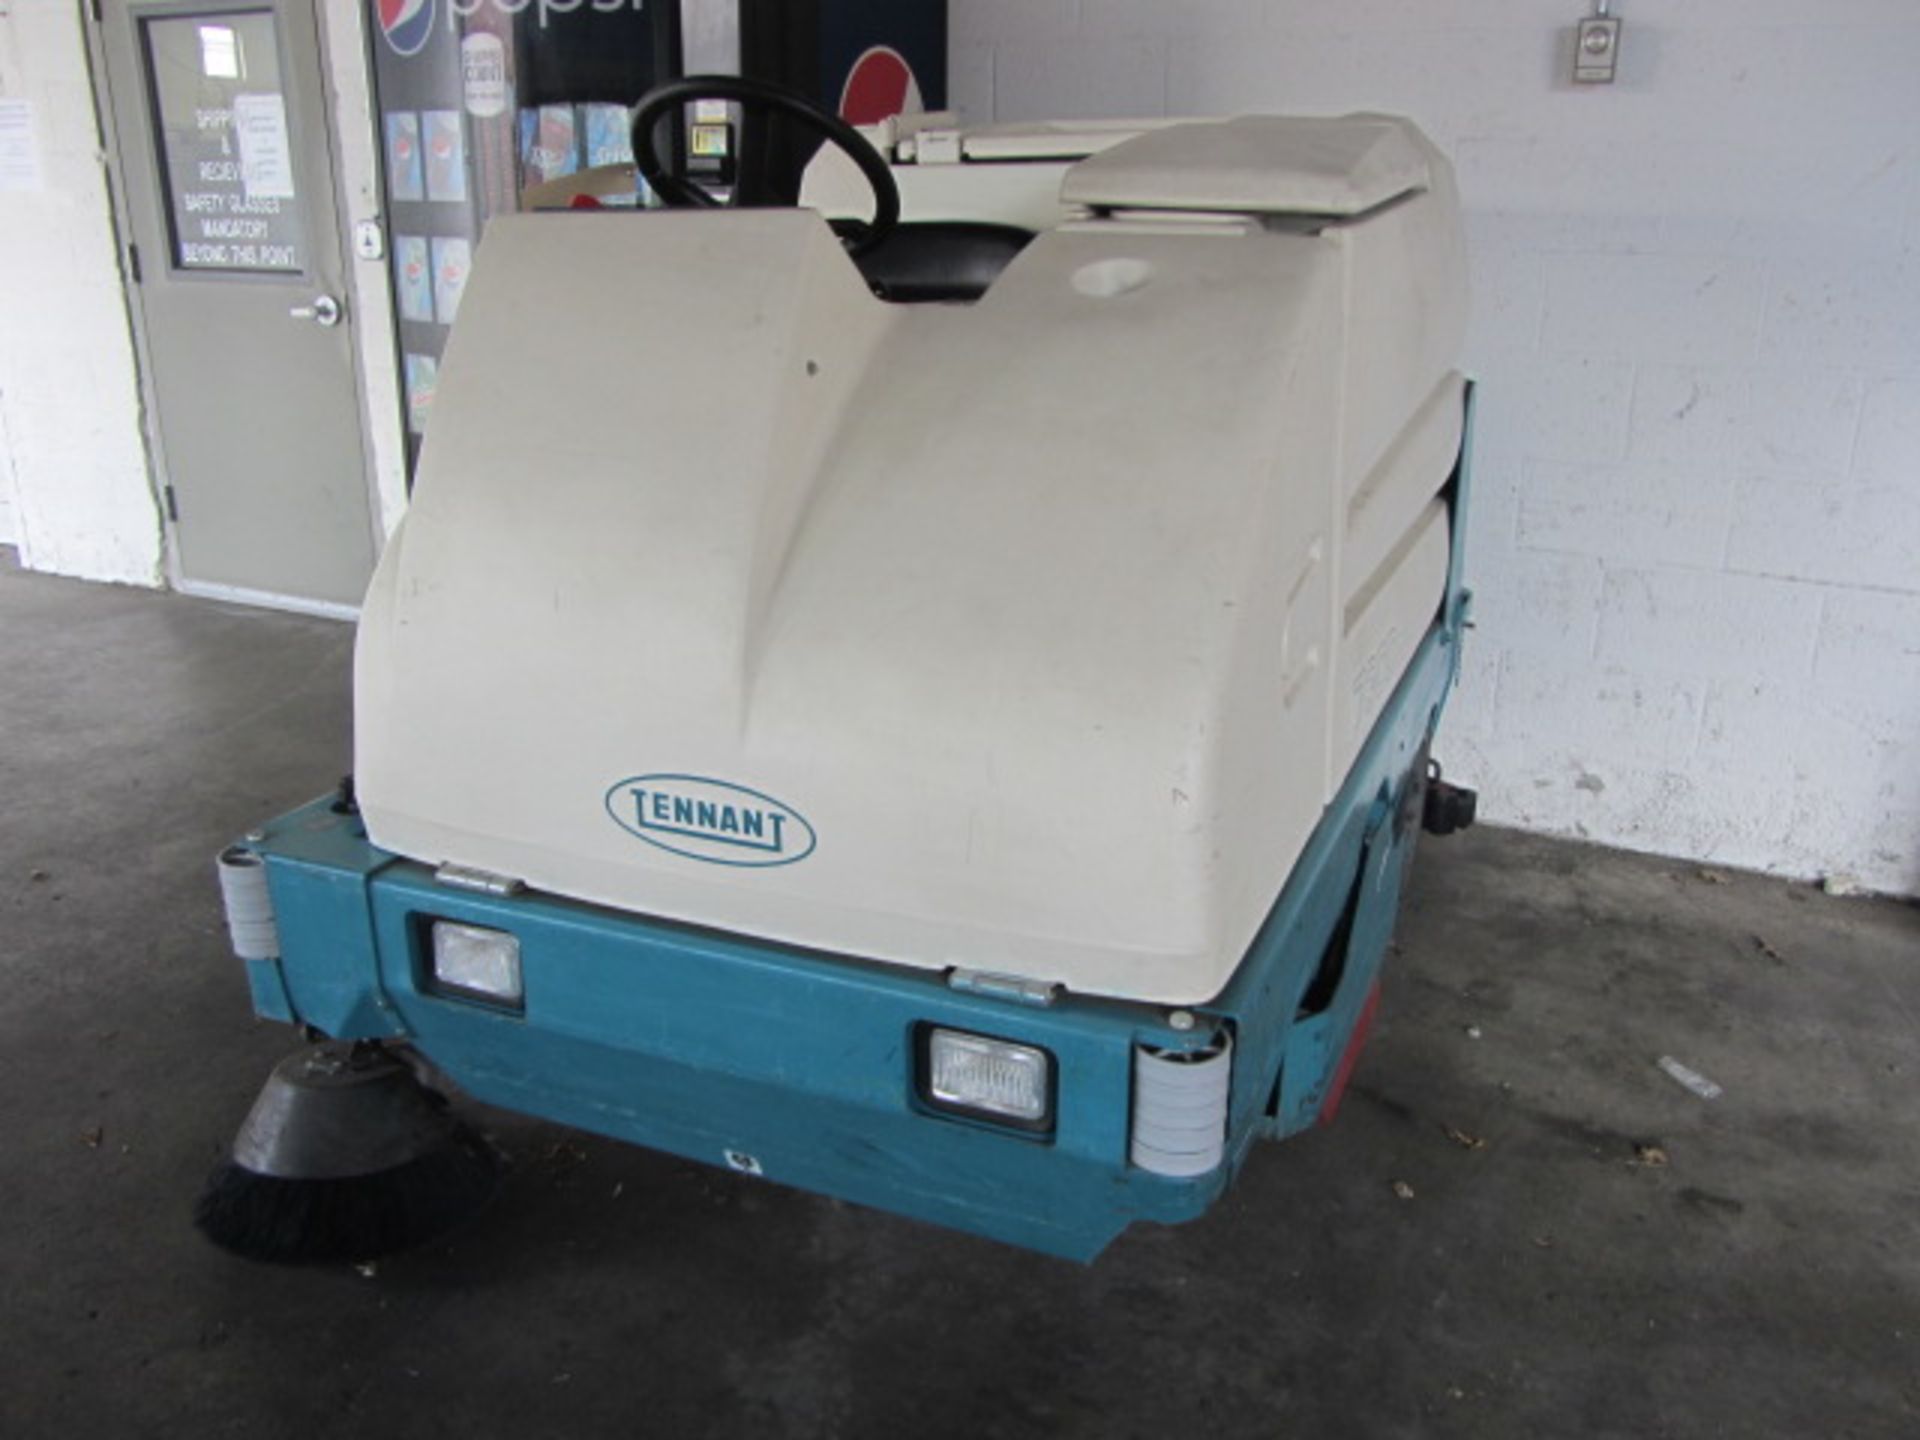 Tennant 7300 Disk Riding Floor Scrubber with 40'' Path, Readout, sn:7300-3310 - Image 4 of 7